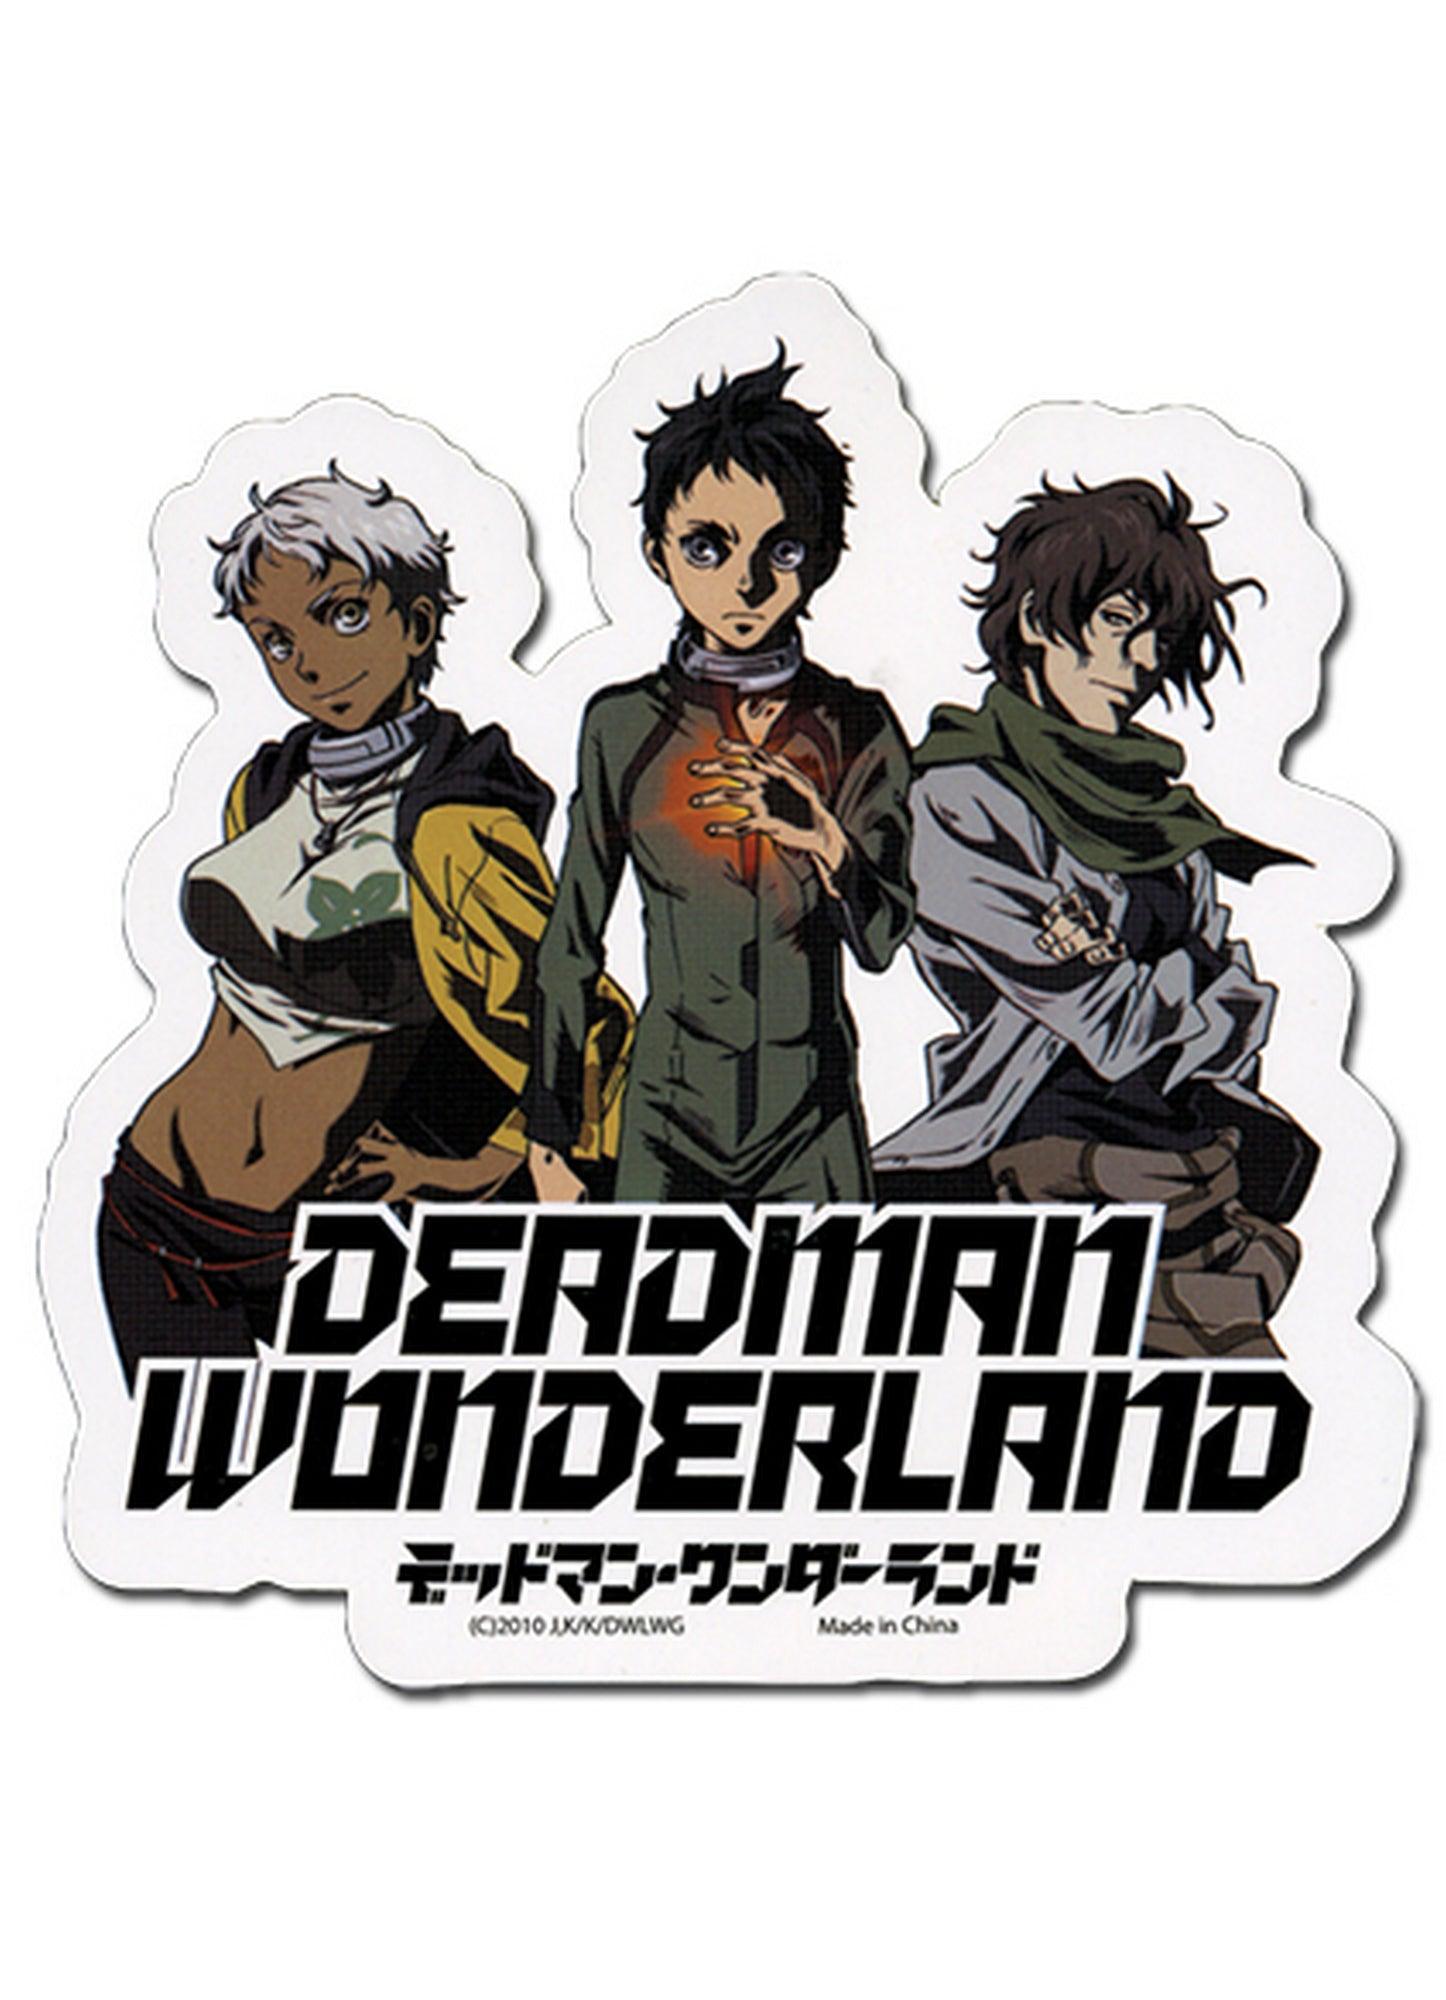 Deadman Wonderland Review: A World of Insanity and Bloodshed | Anime  Anemoscope